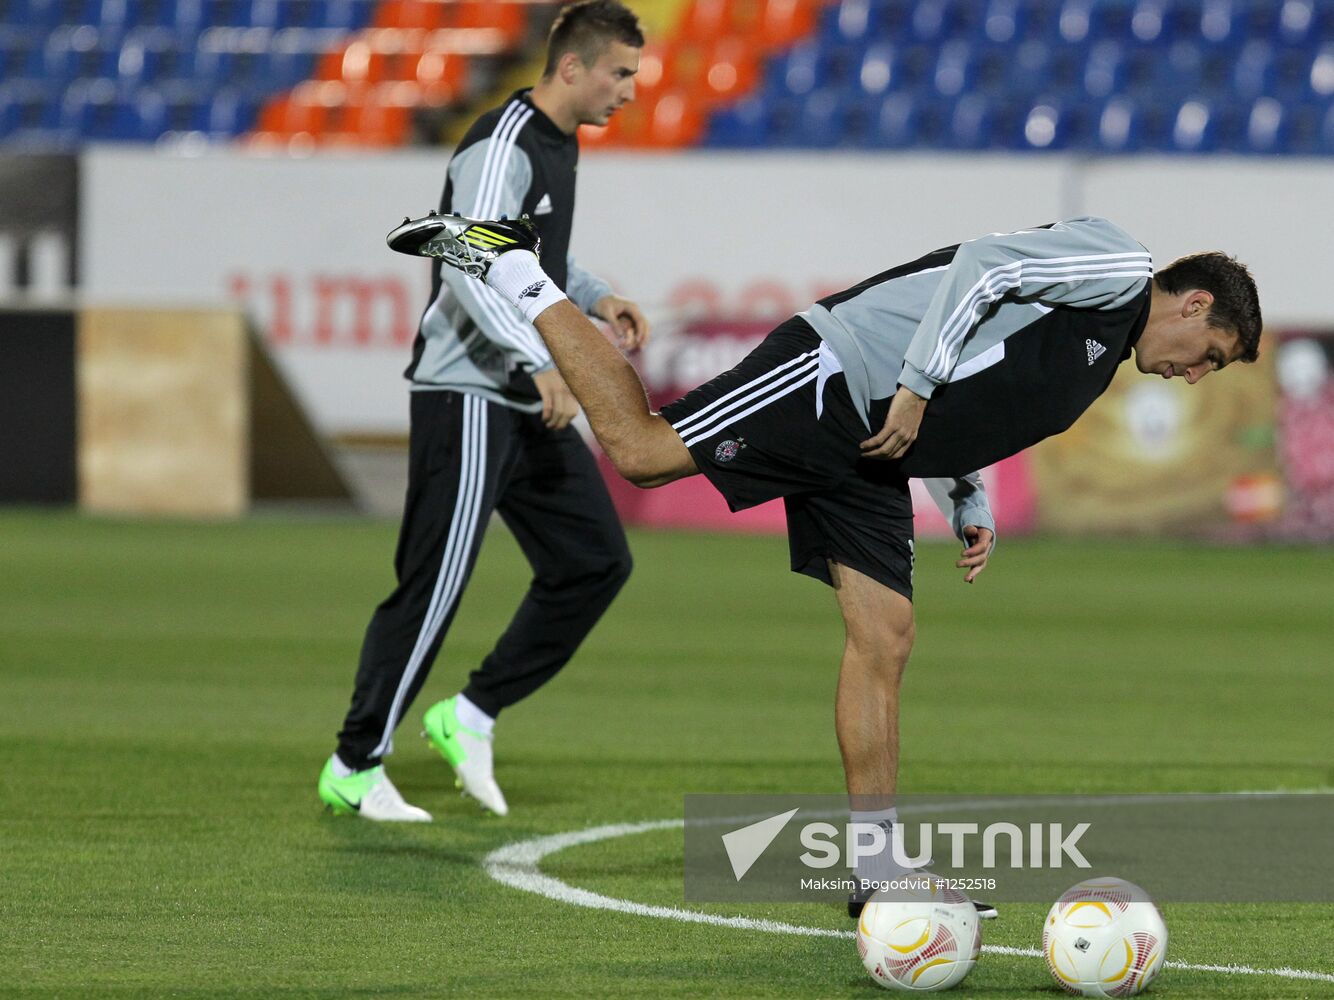 Football. LE. P/c and training session of Partizan (Serbia)